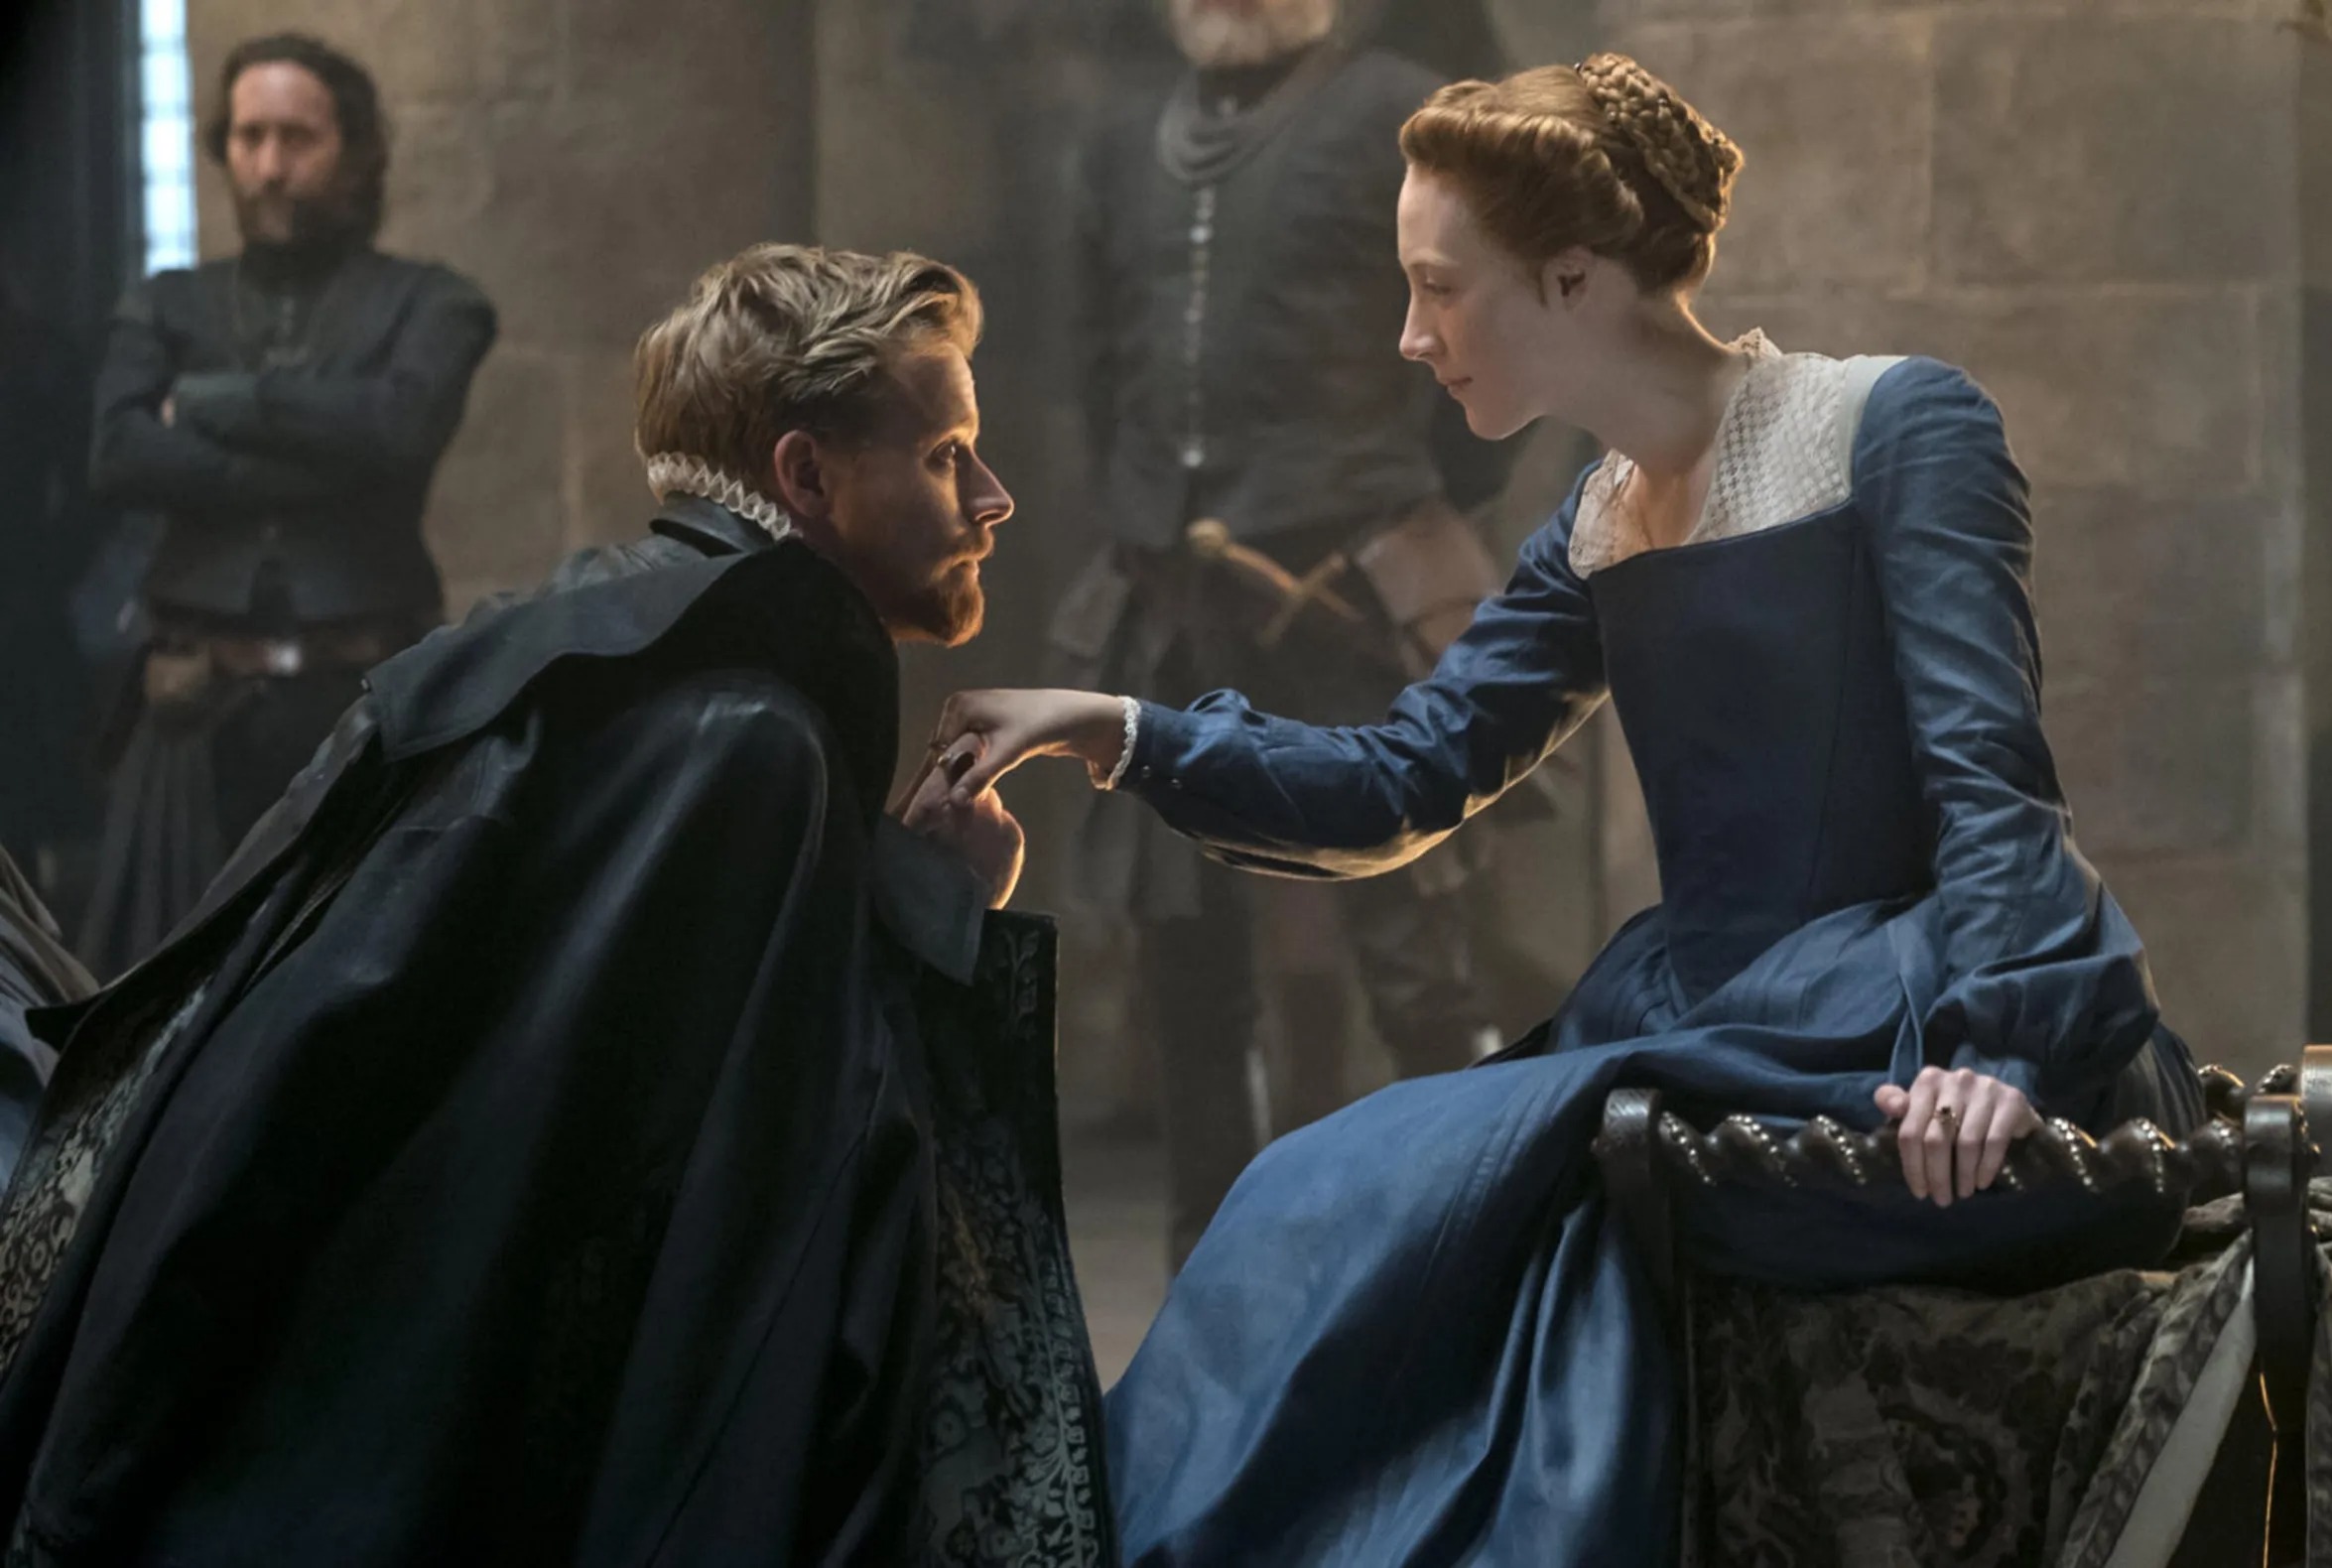 The pair starred in the 2018 film Mary Queen of Scots together